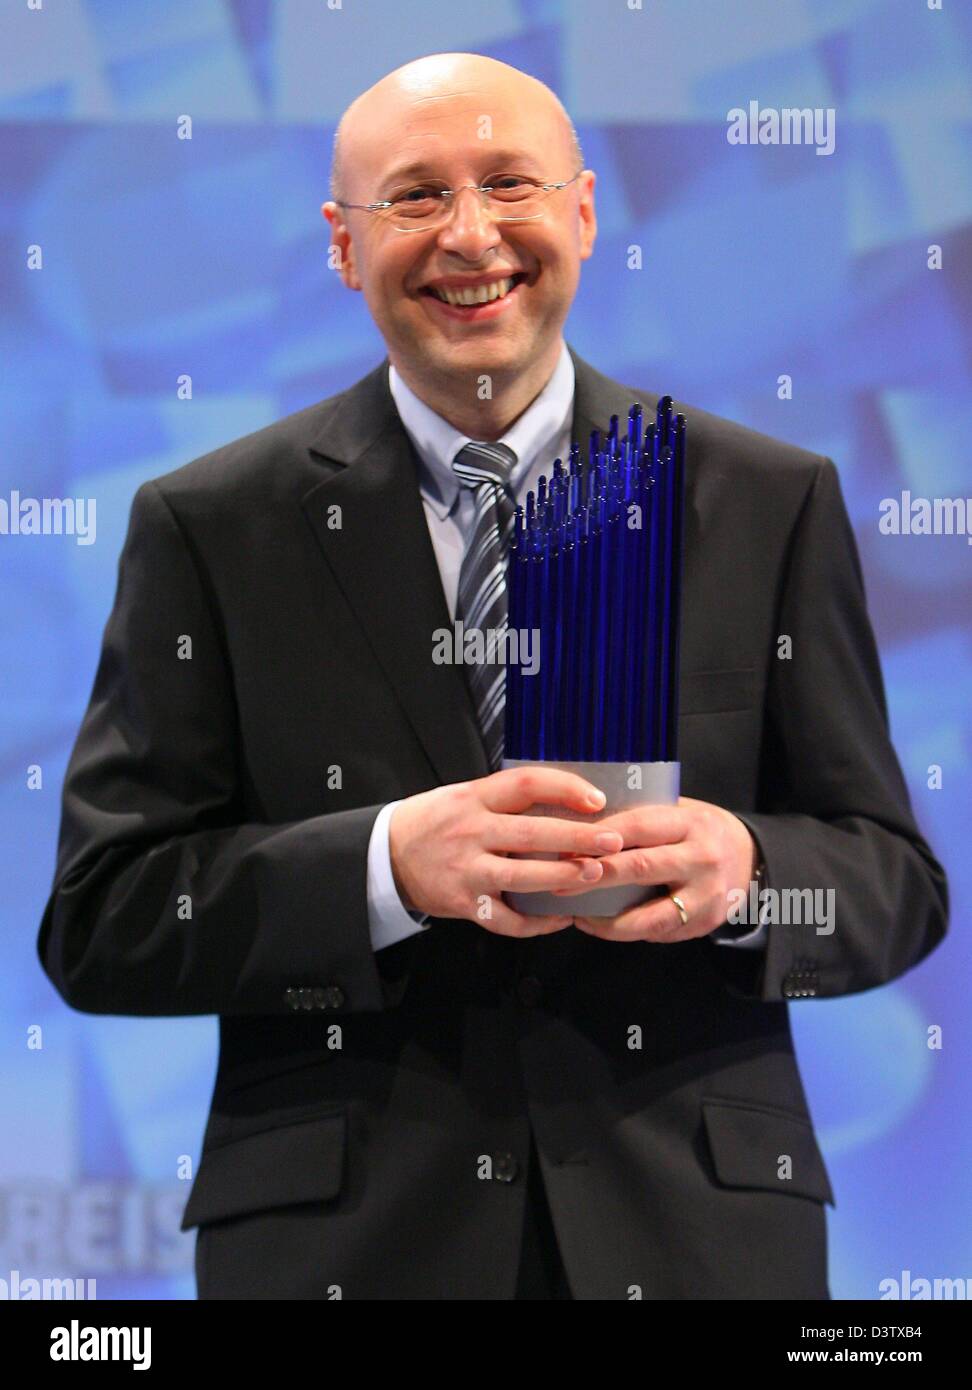 Stefan W. Hell of the Max Planck Institute for Biophysical Chemistry in Goettingen pictured with the German Innovation Award in Berlin, Germany, 23 November 2006. Hell receives the award for his work in the field of light microscopy. Photo: Steffen Kugler Stock Photo